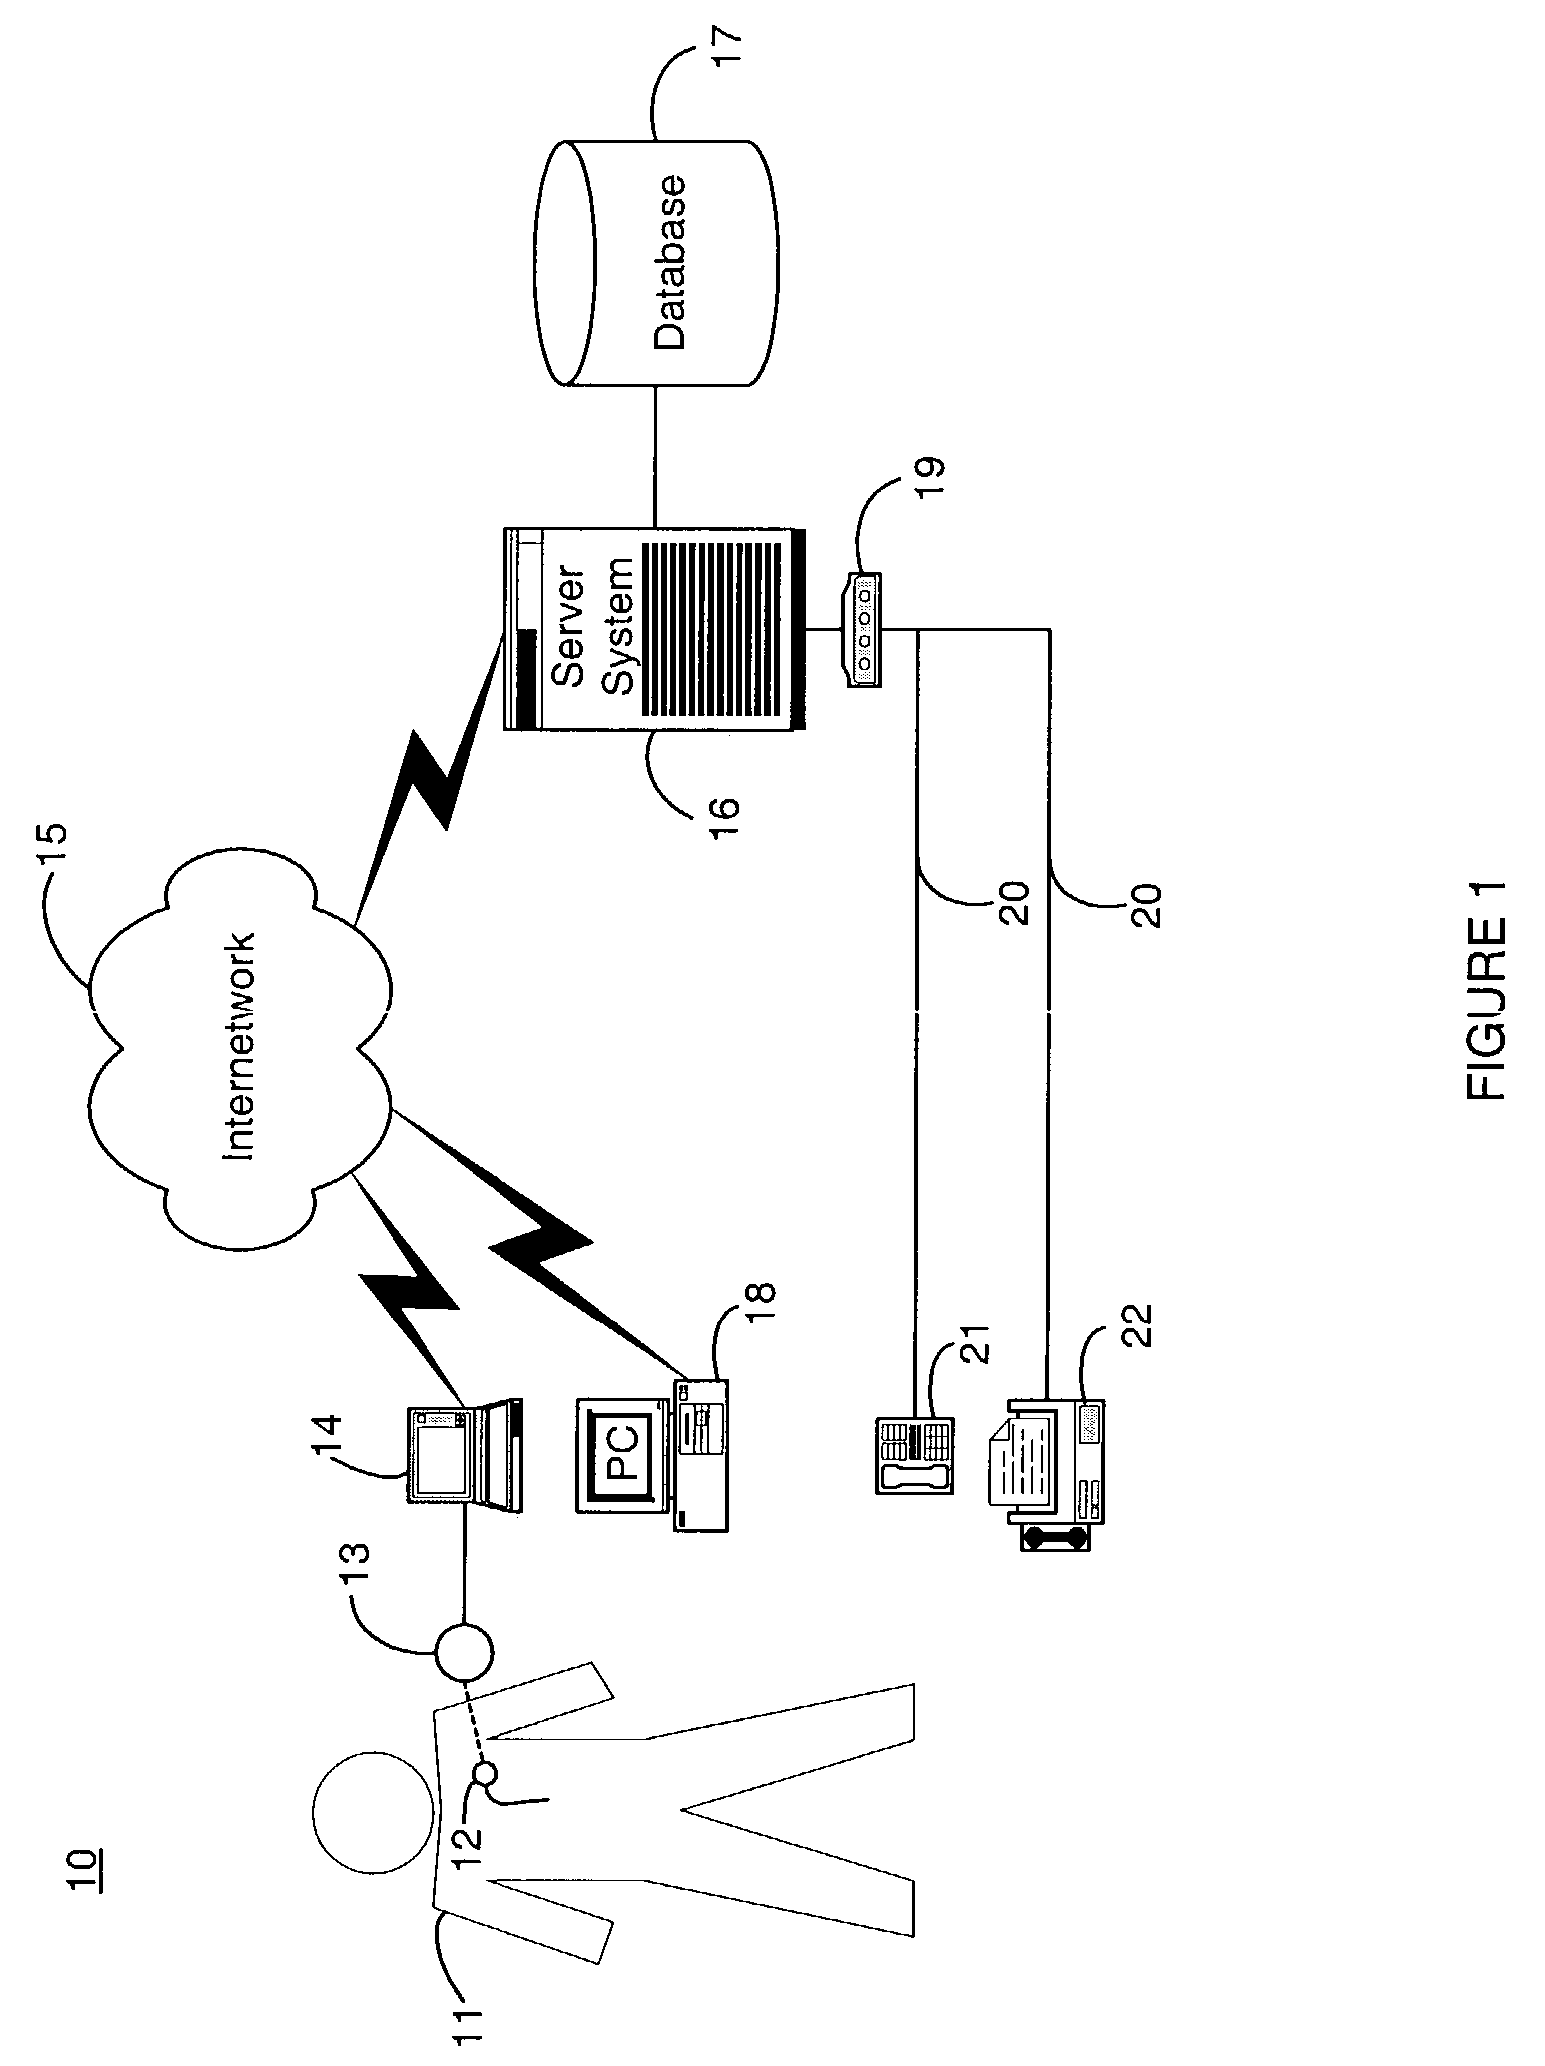 System and method for providing tiered patient feedback for use in automated patient care